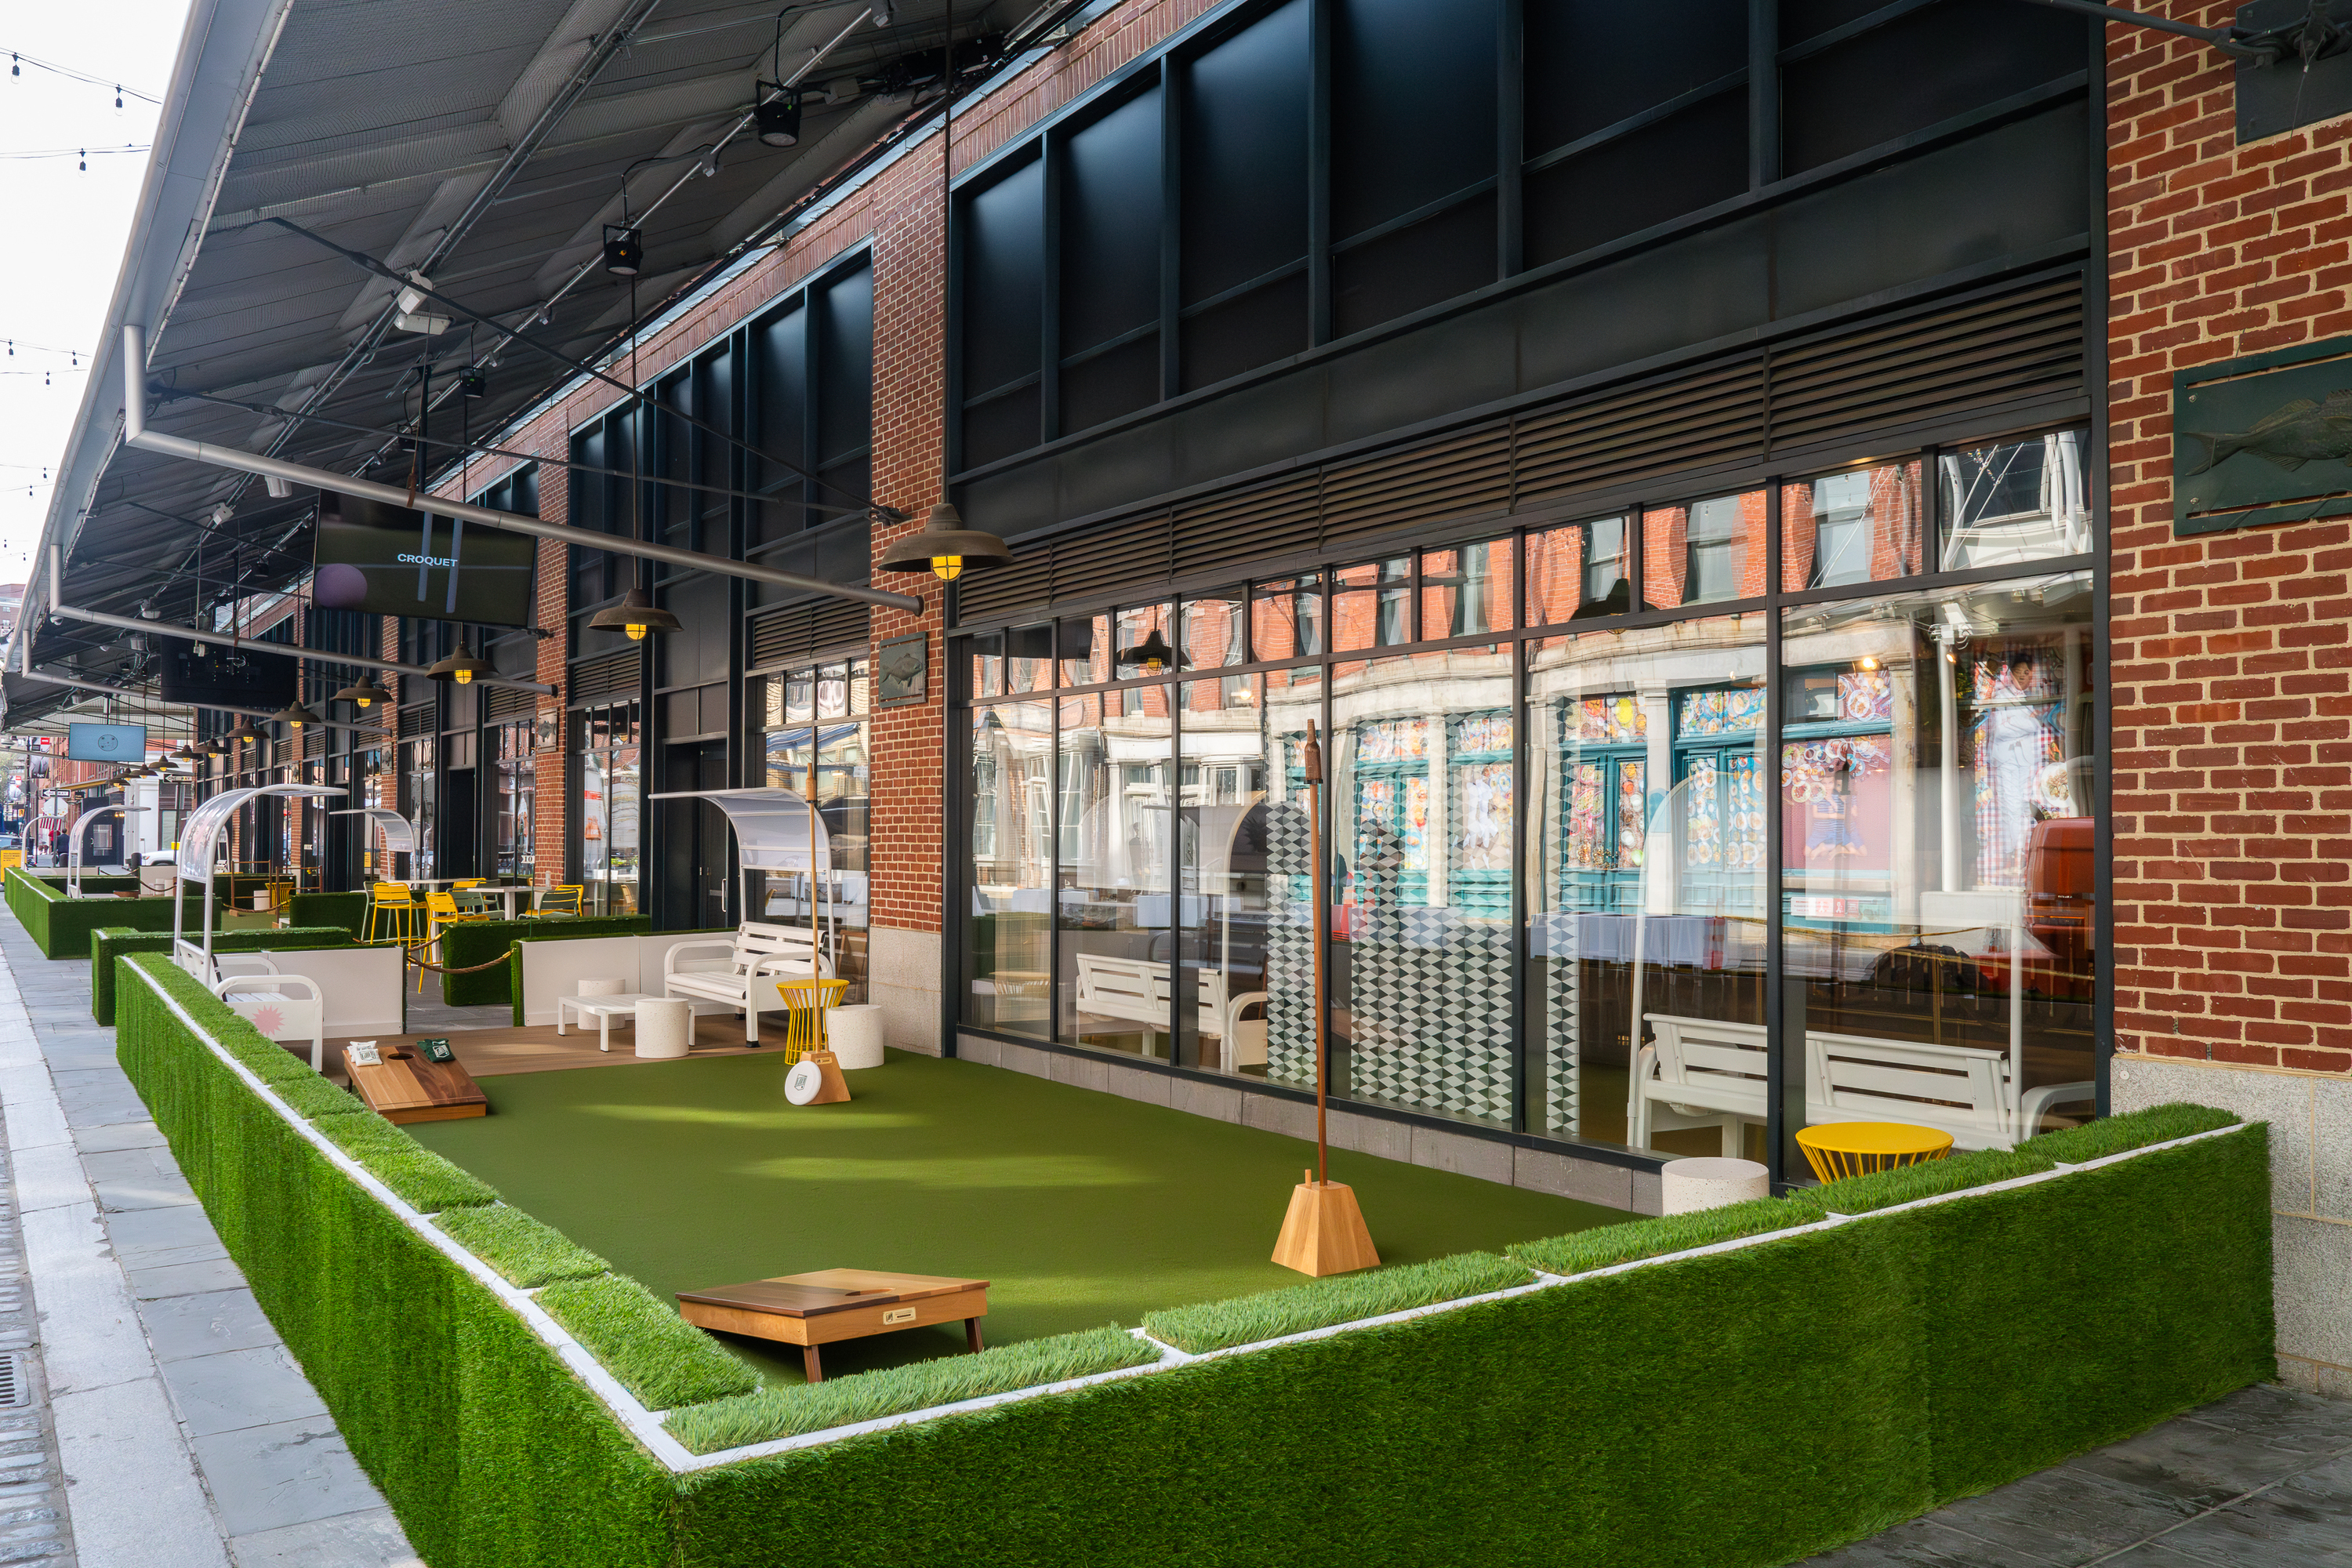 Exclusive: The outdoor Lawn Club with TV screens and more just opened by the Seaport